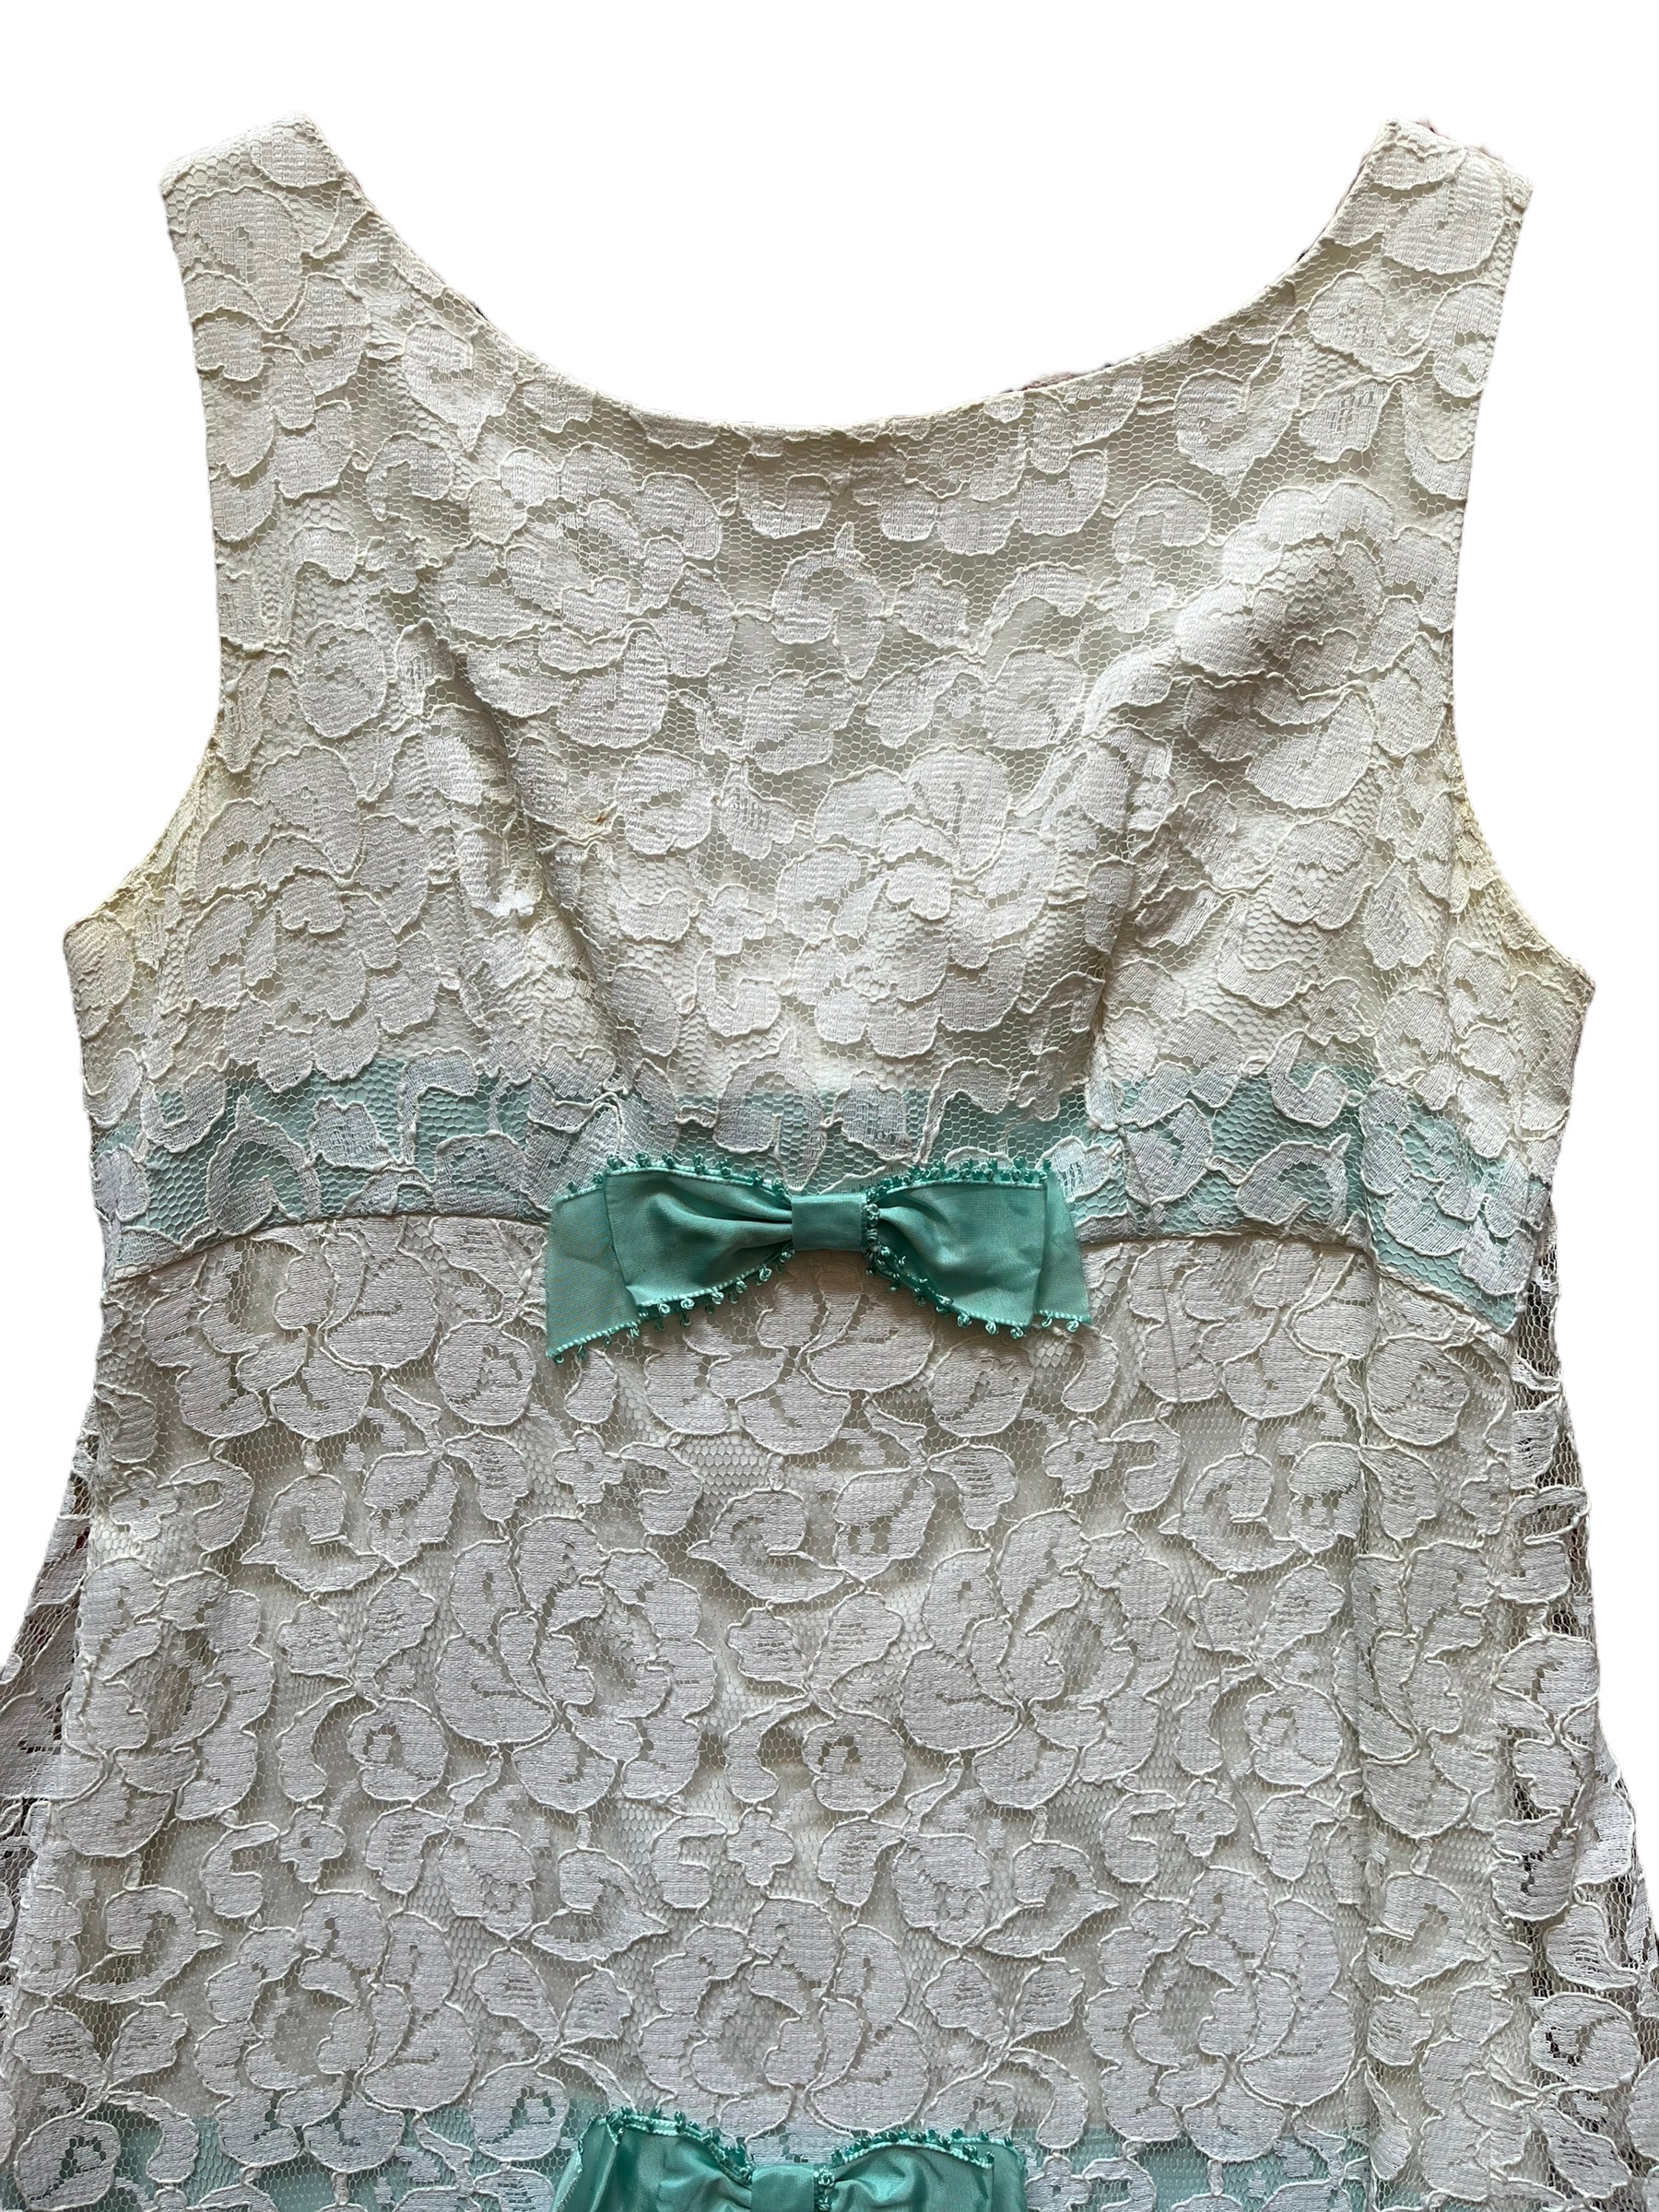 Front top view of Vintage 1960s Lace Dress with Blue Bows